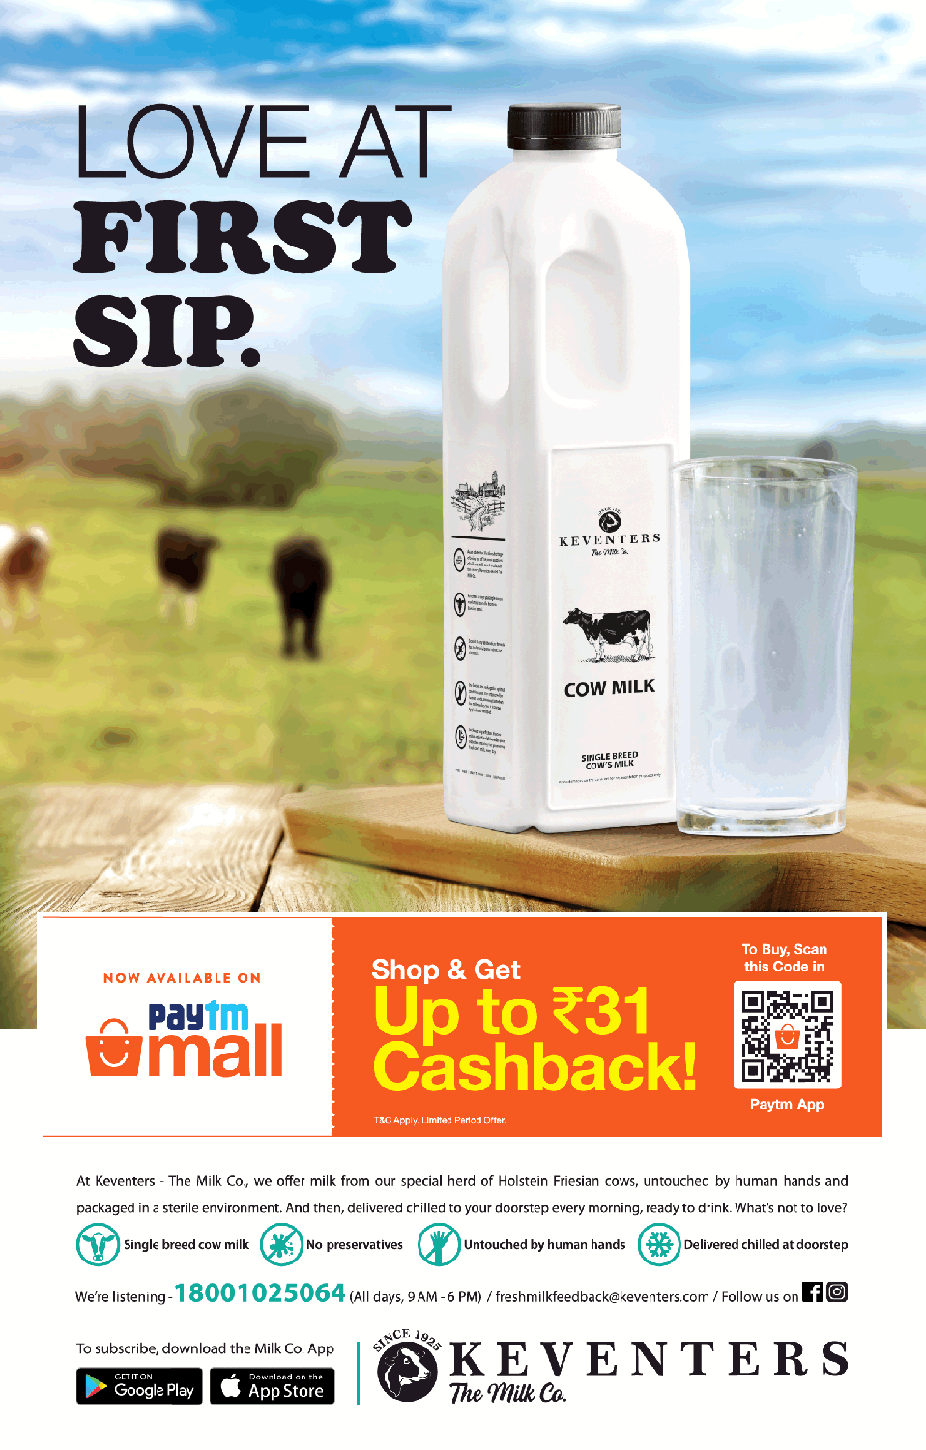 keventers-cow-milk-love-at-first-sip-ad-delhi-times-24-11-2018.png